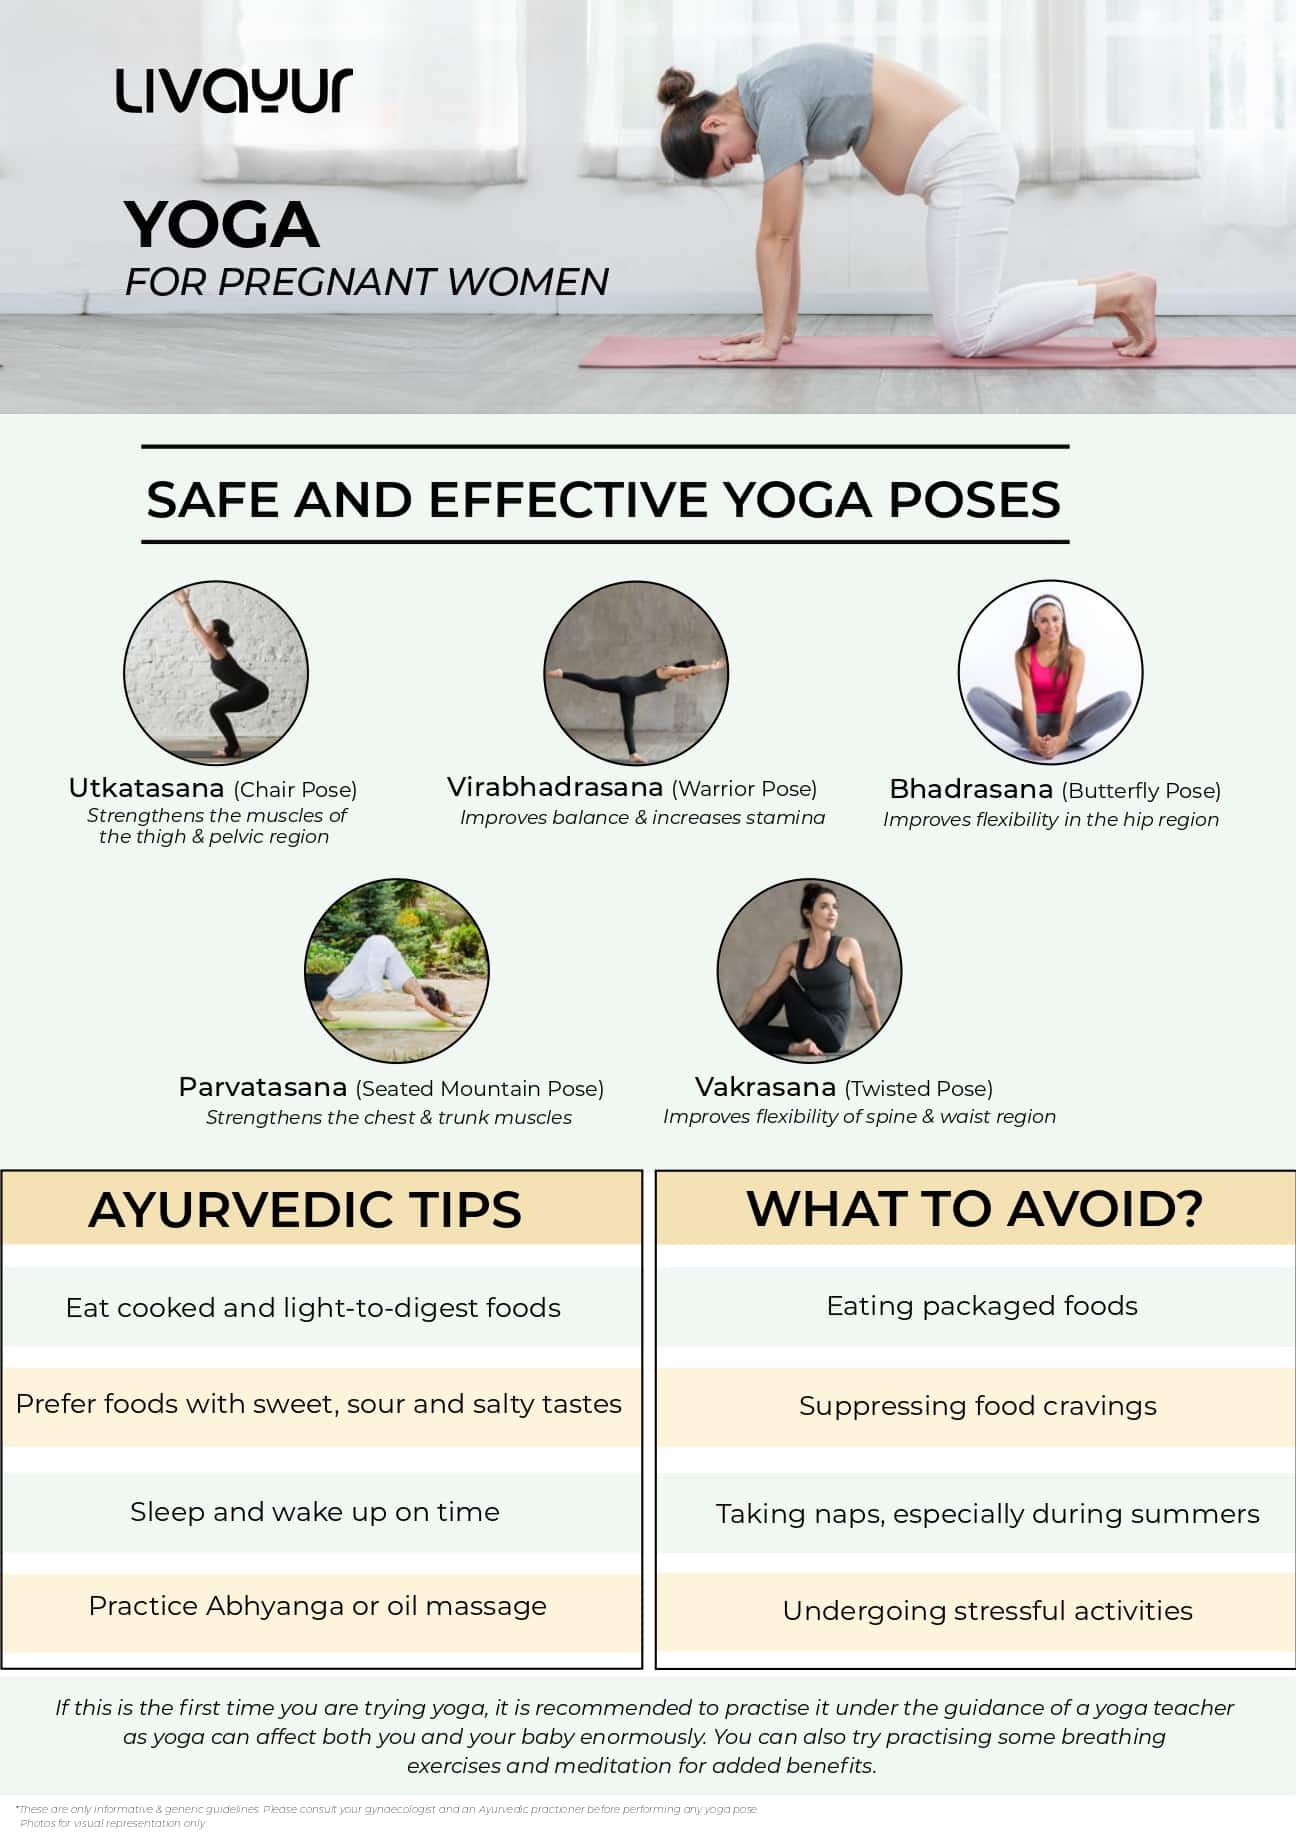 Here is how Yoga saves you from PCOS | TheHealthSite.com